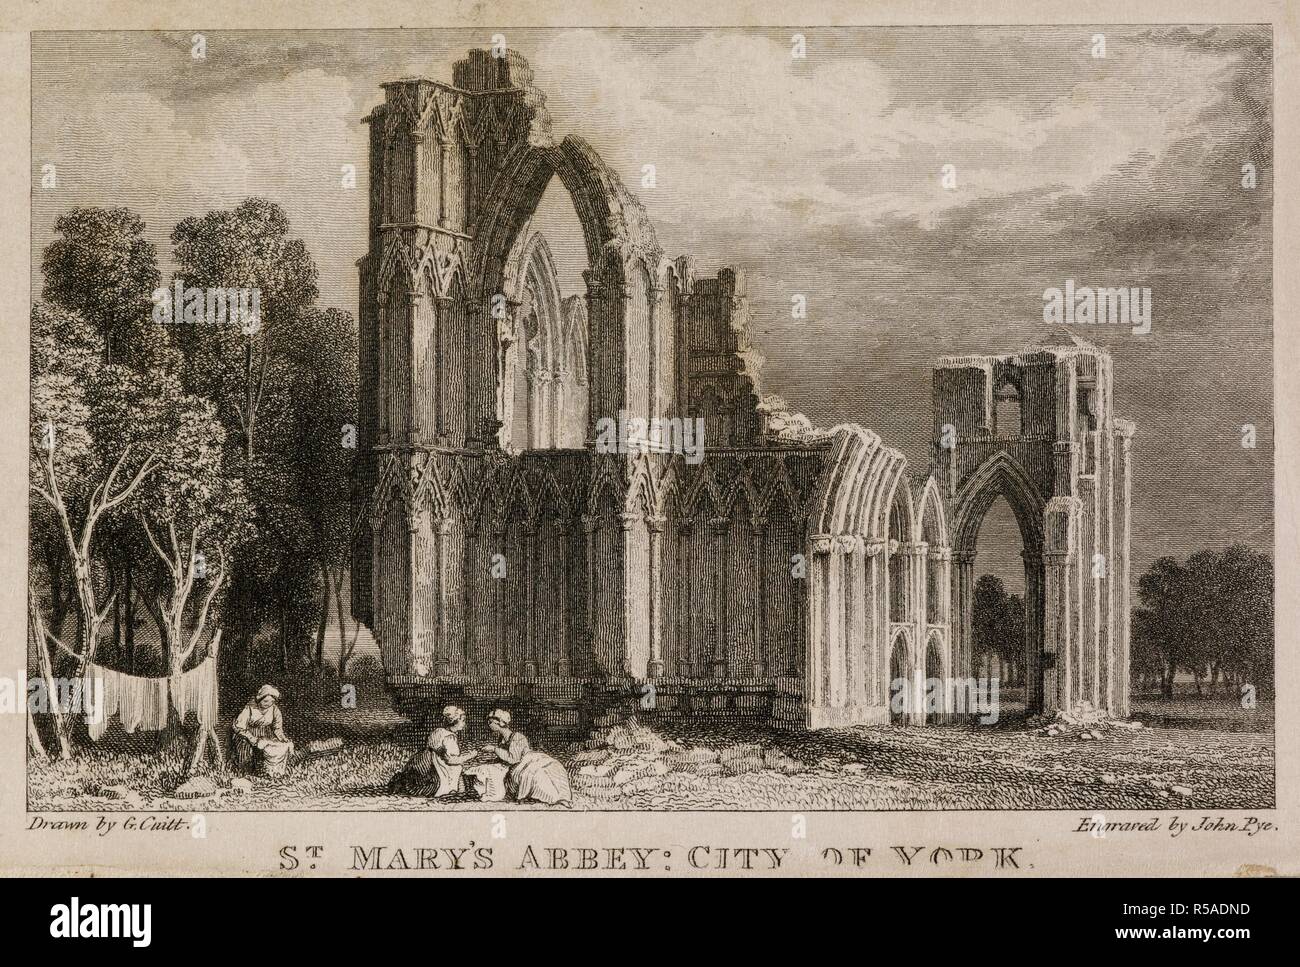 Illustration from guidebook. St Mary's Abbey church in the city of York. Ruin. Arches and walls. Three women hanging out washing. . Le Souvenir pocket tablet or guidebook. England. Le Souvenir, or Pocket Tablet for MDCCC (MDCCCXV, MDCCCXXVIII, MDCCCXXXII, MDCCCXXXIV, MDCCCXIX, 1843-1848, 1854, 1855, 1857-1873). J. Godwin. 1834, 1846-1848. Source: C.70.a.1 frontispiece. Author: Pye, John. Stock Photo